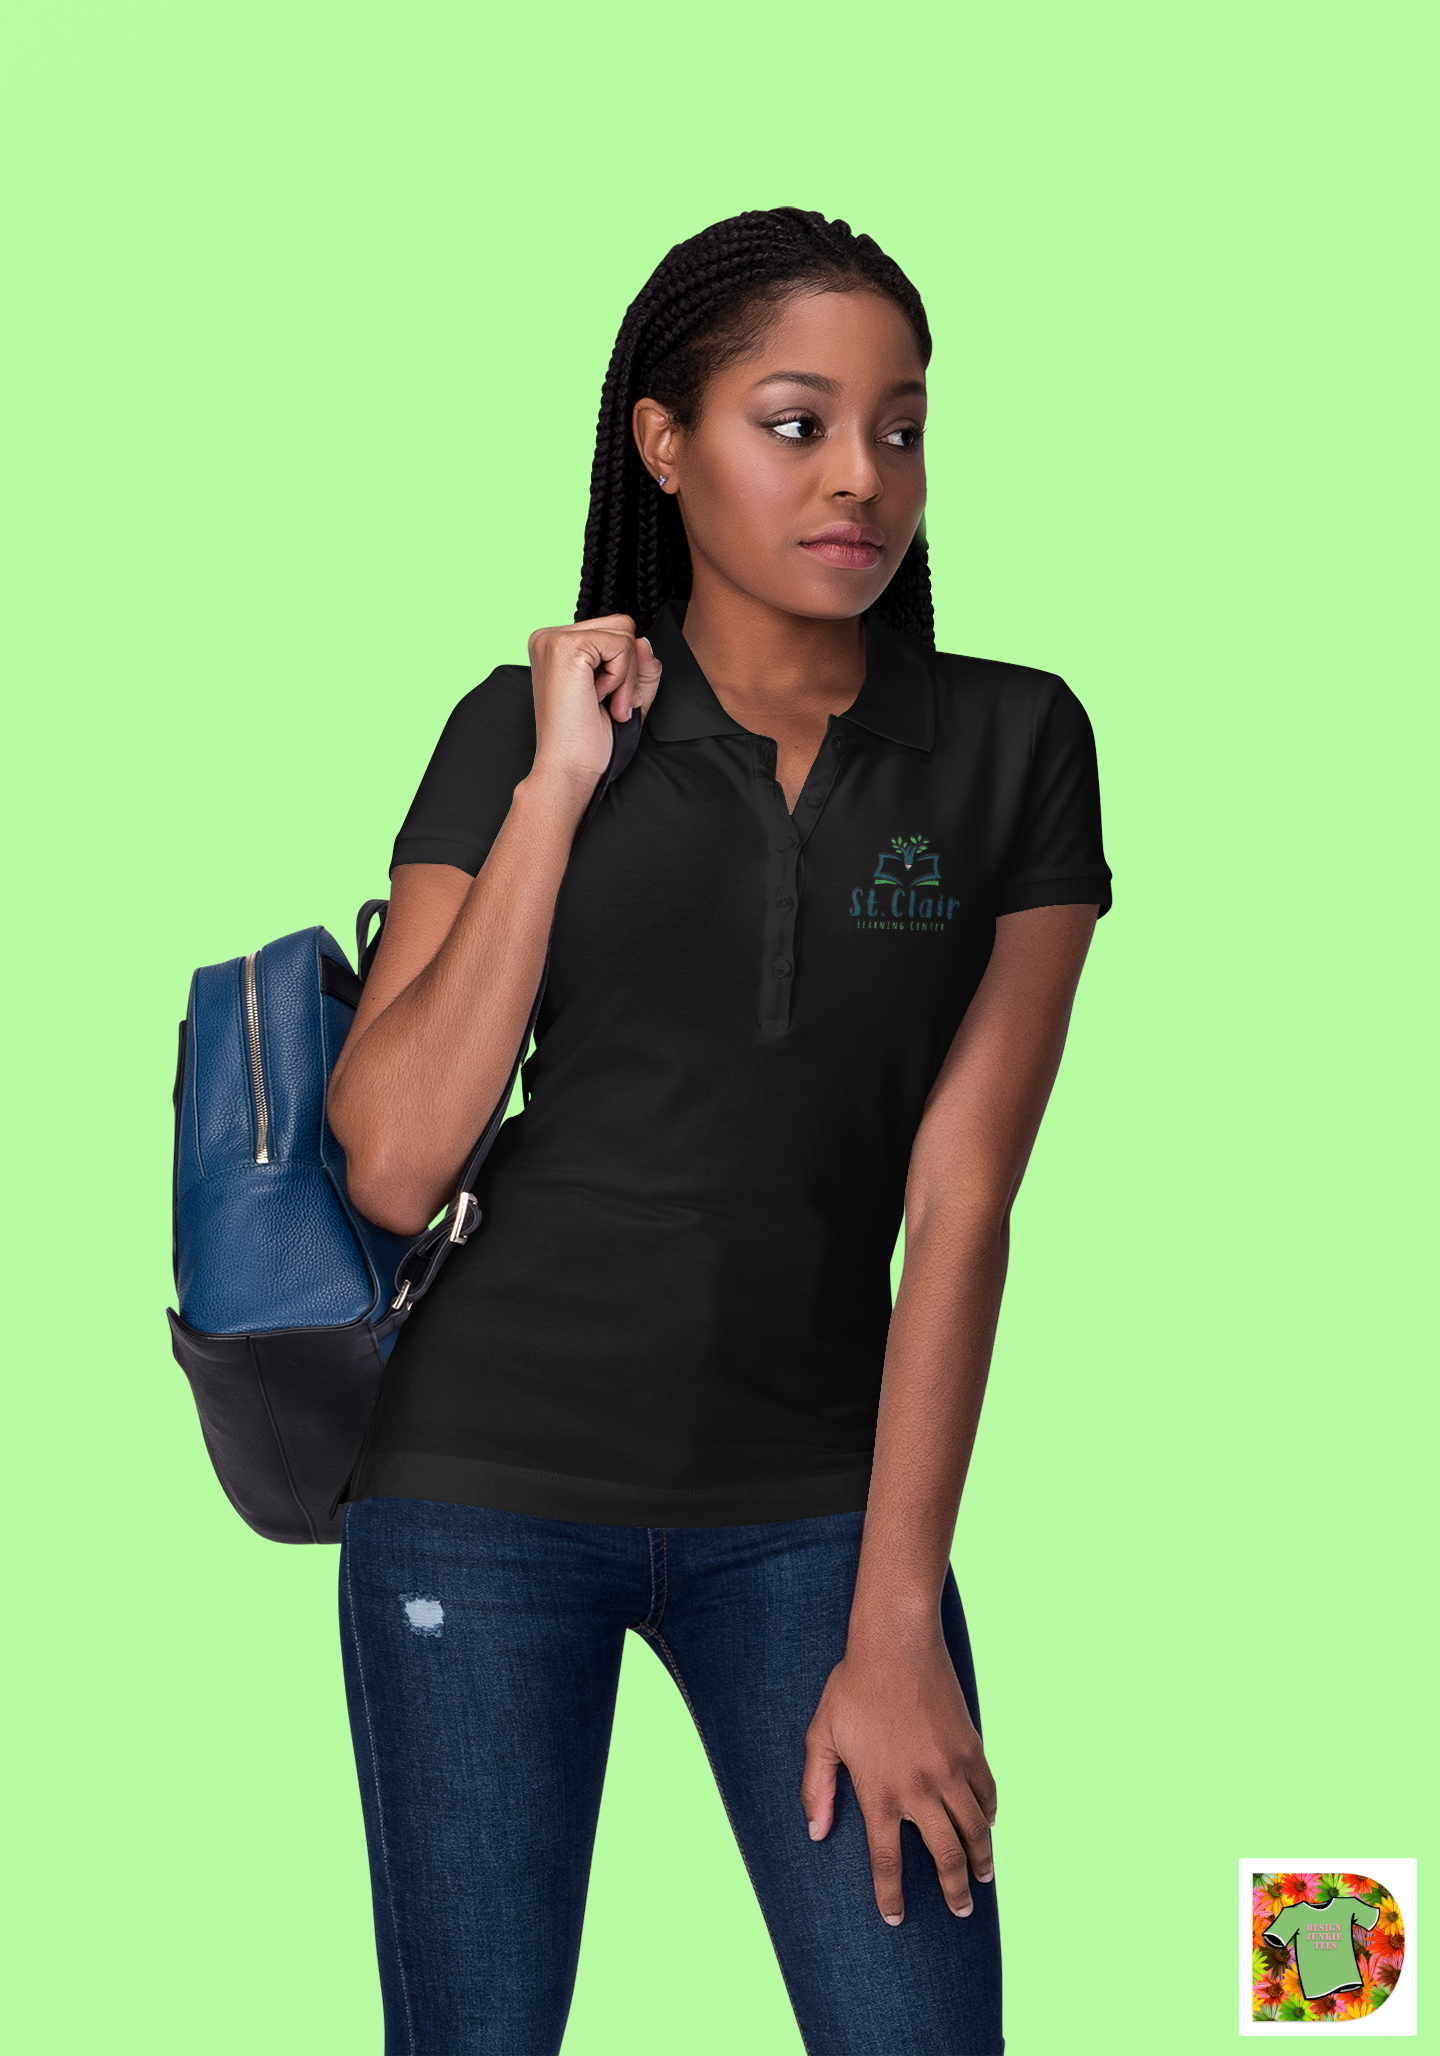 St. Clair Learning Center Embroidered Women's Polo Shirt